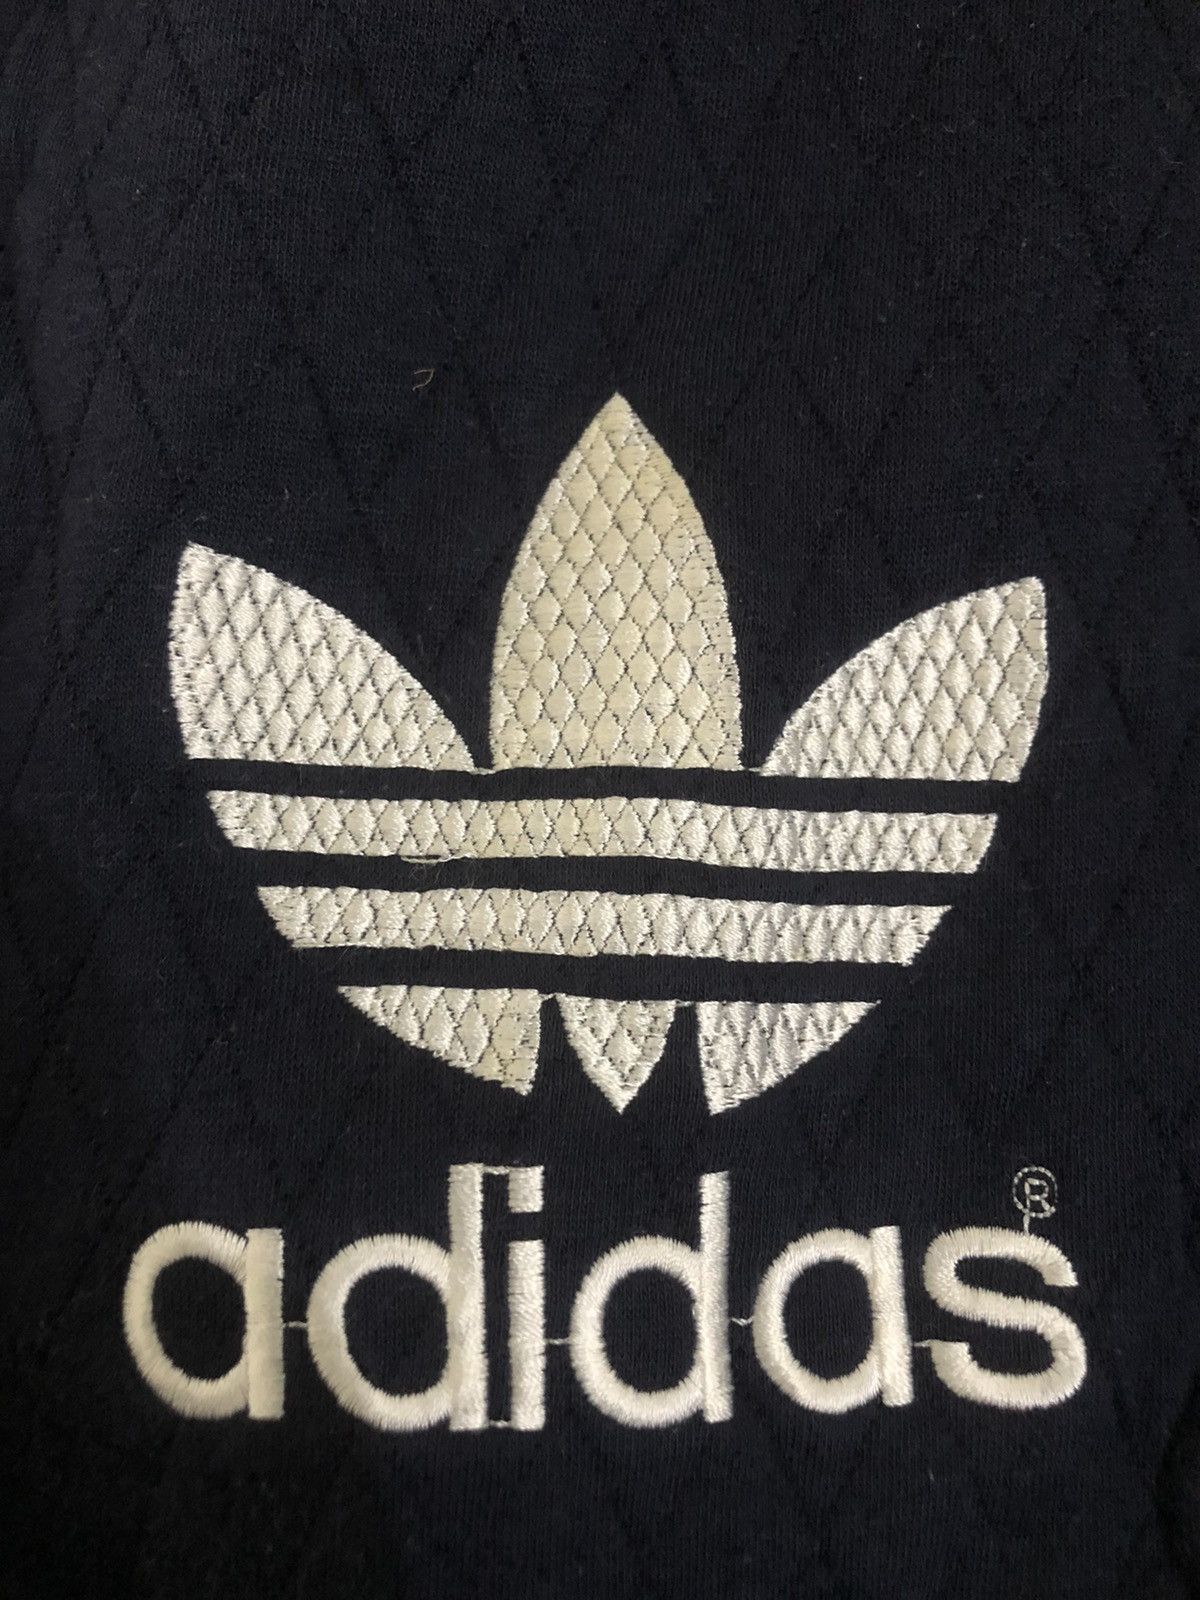 Vintage Adidas Quilted Embroidery Trefoil Sweatshirt - 5